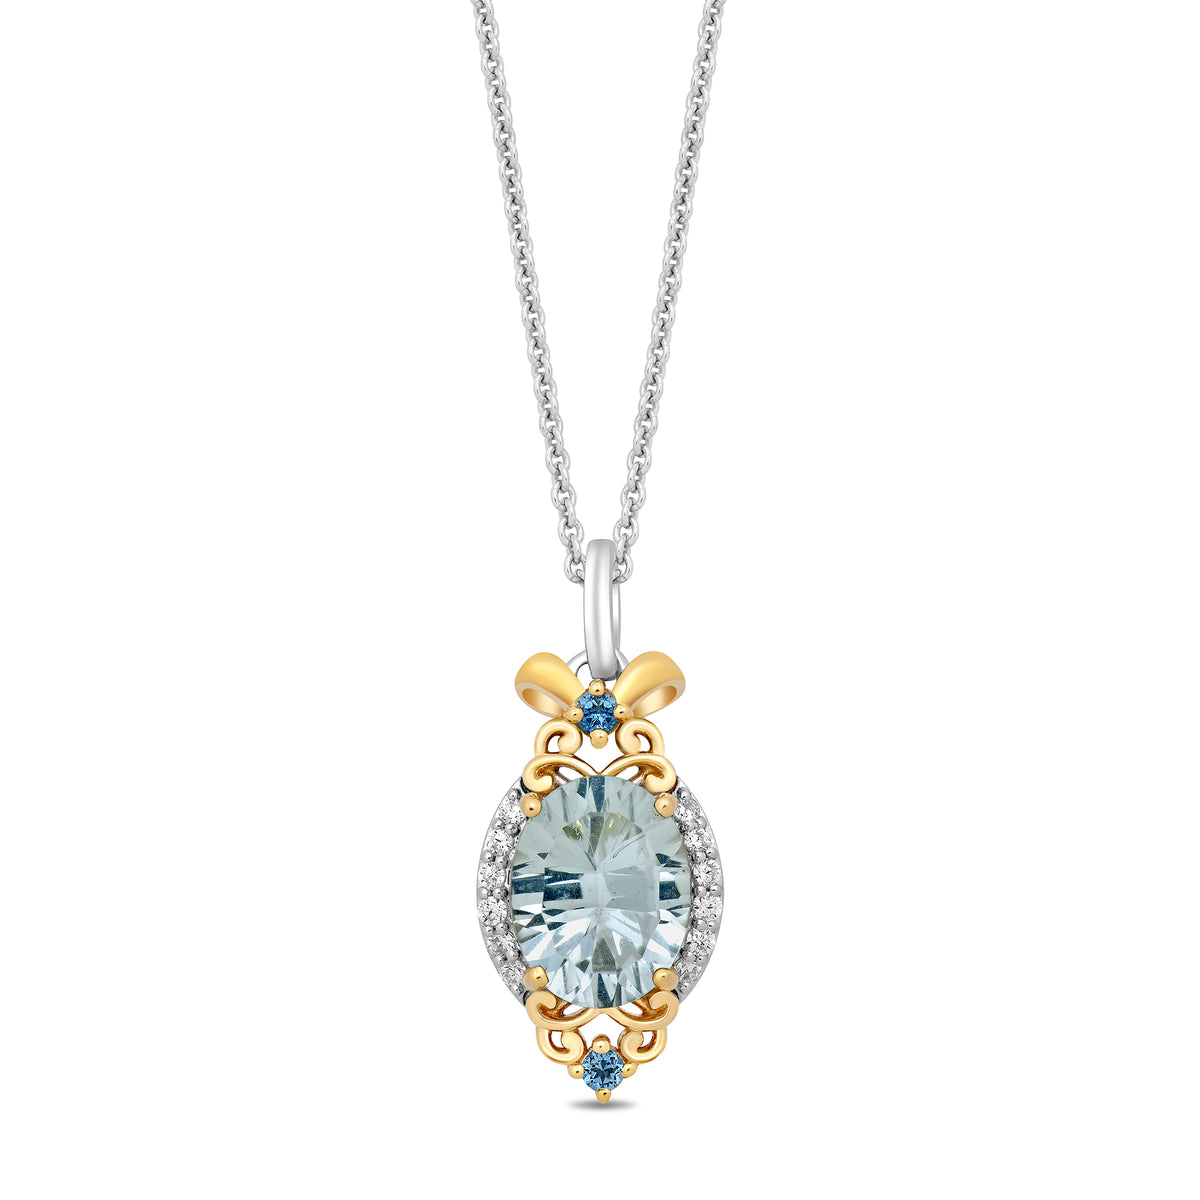 Topaz Necklace - Element 79 Contemporary Jewelry